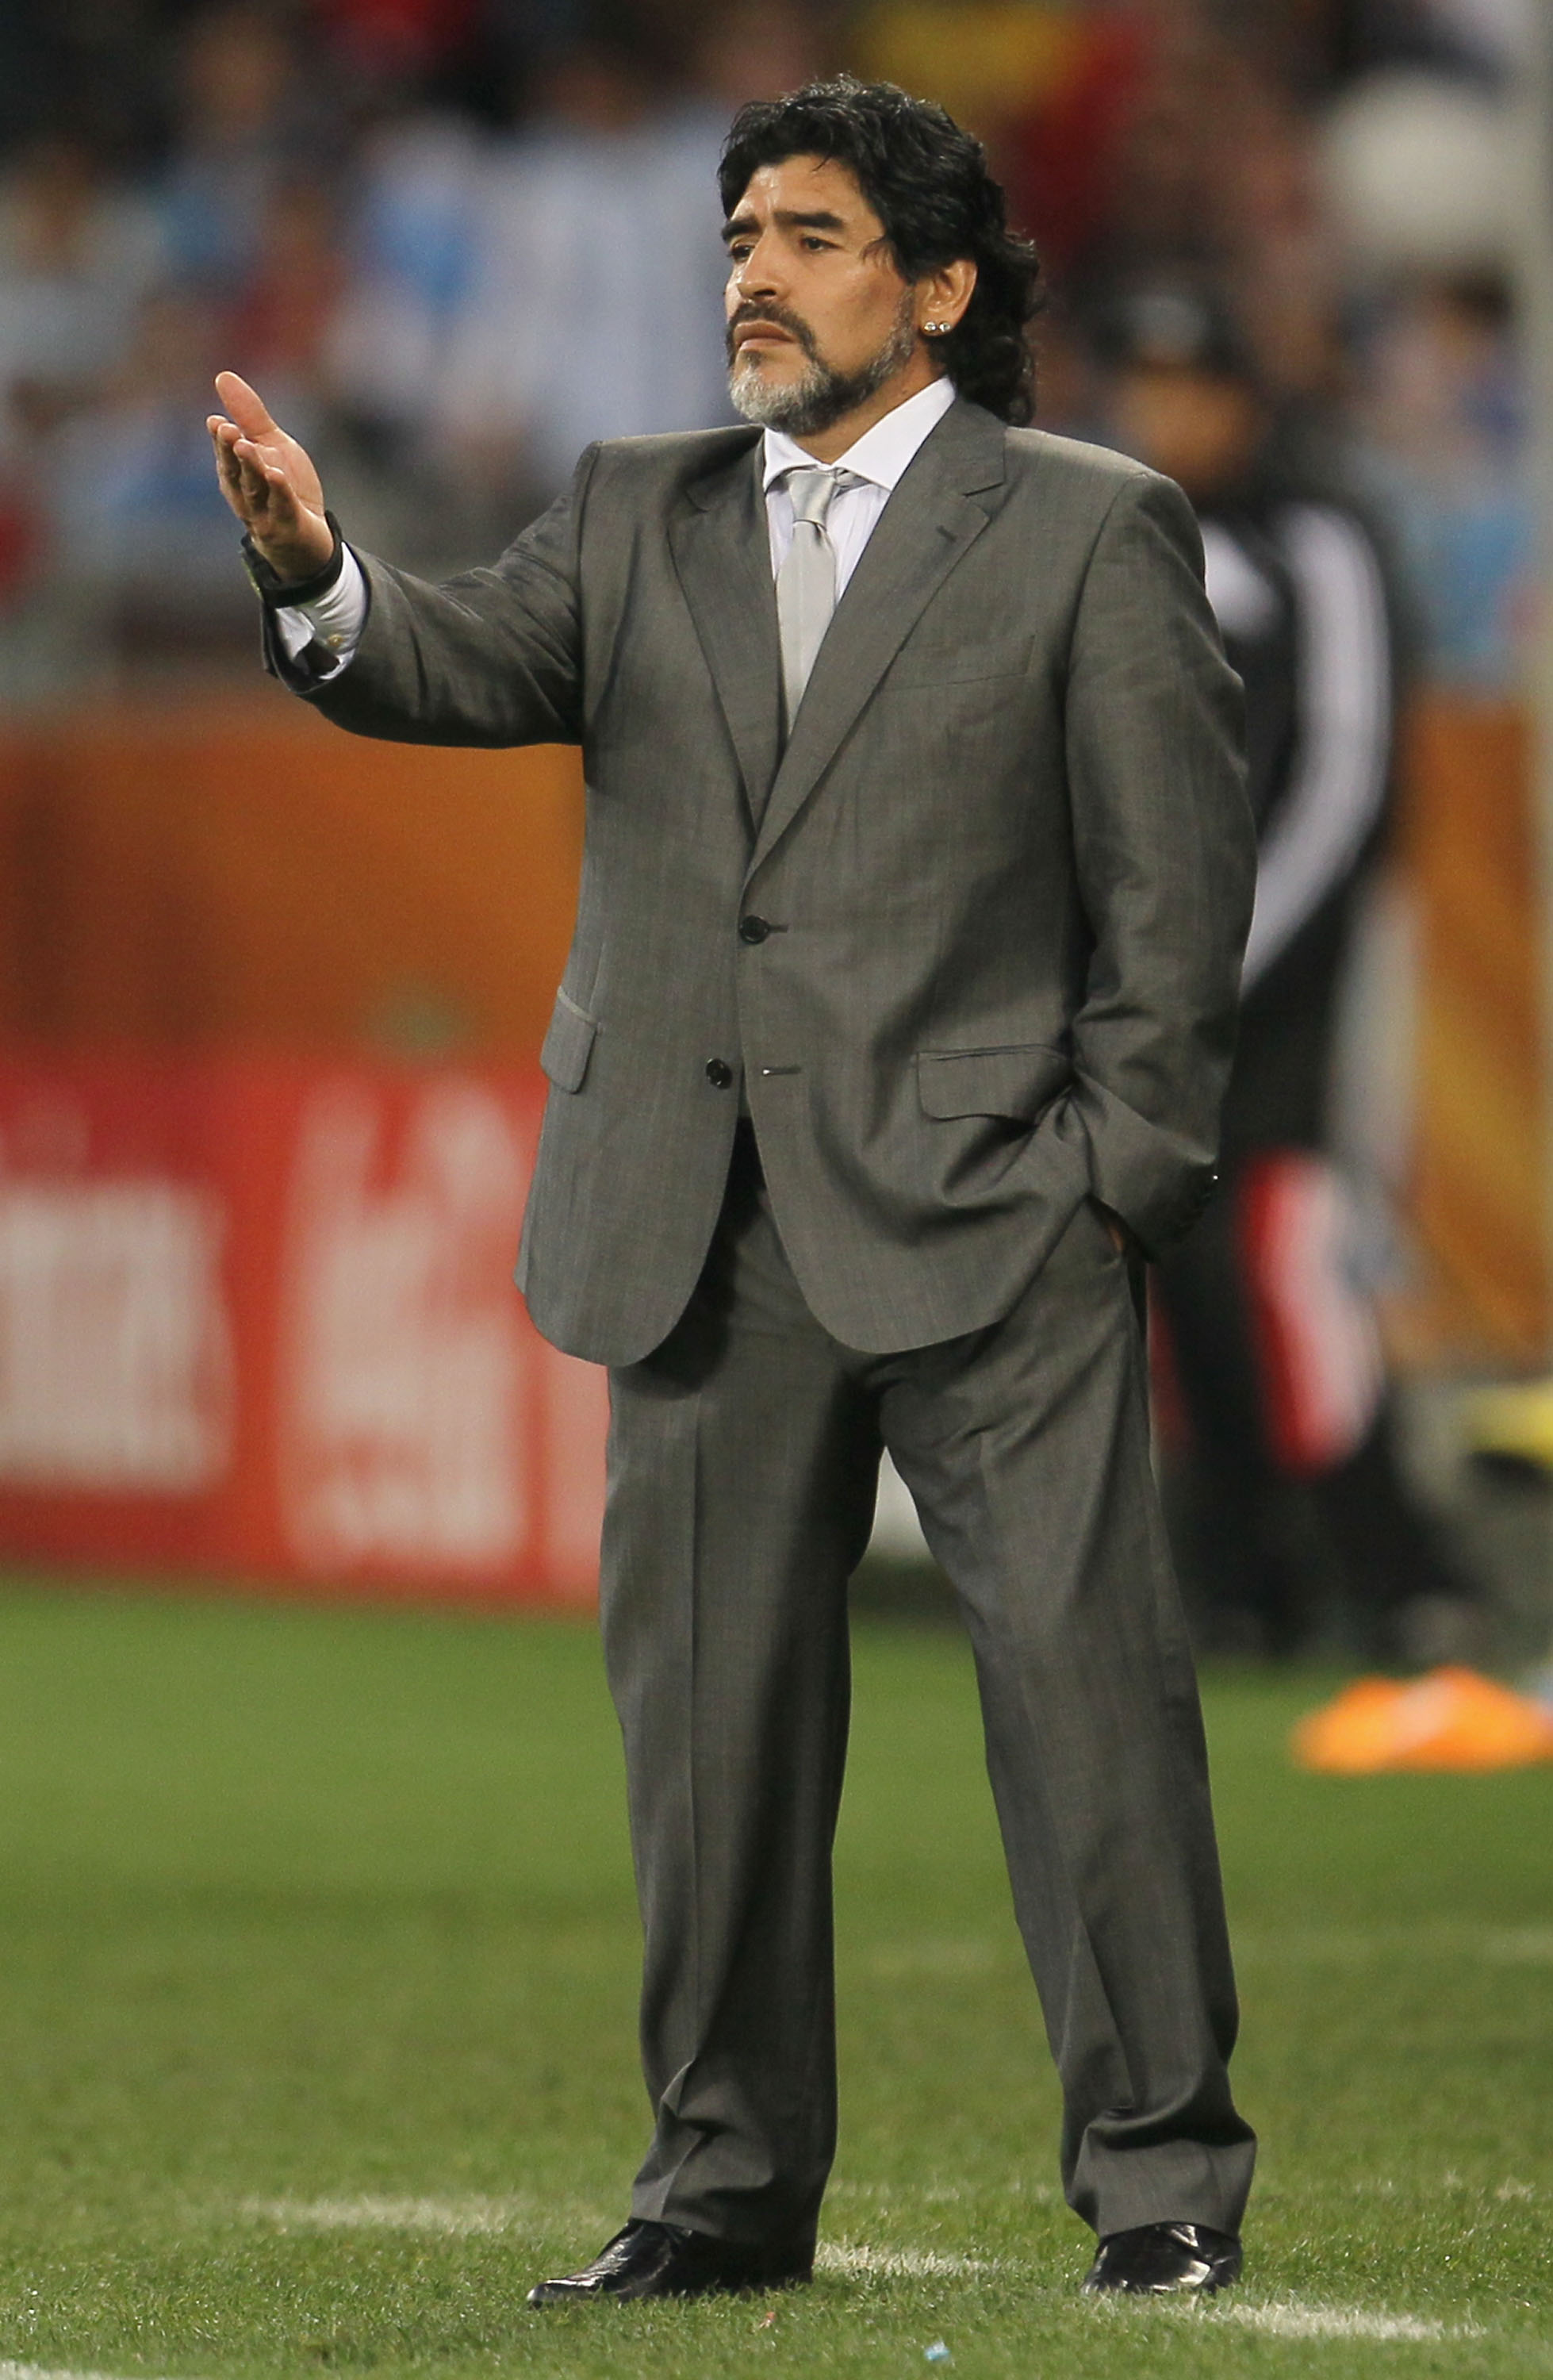 CAPE TOWN, SOUTH AFRICA - JULY 03:  Diego Maradona head coach of Argentina gestures during the 2010 FIFA World Cup South Africa Quarter Final match between Argentina and Germany at Green Point Stadium on July 3, 2010 in Cape Town, South Africa.  (Photo by